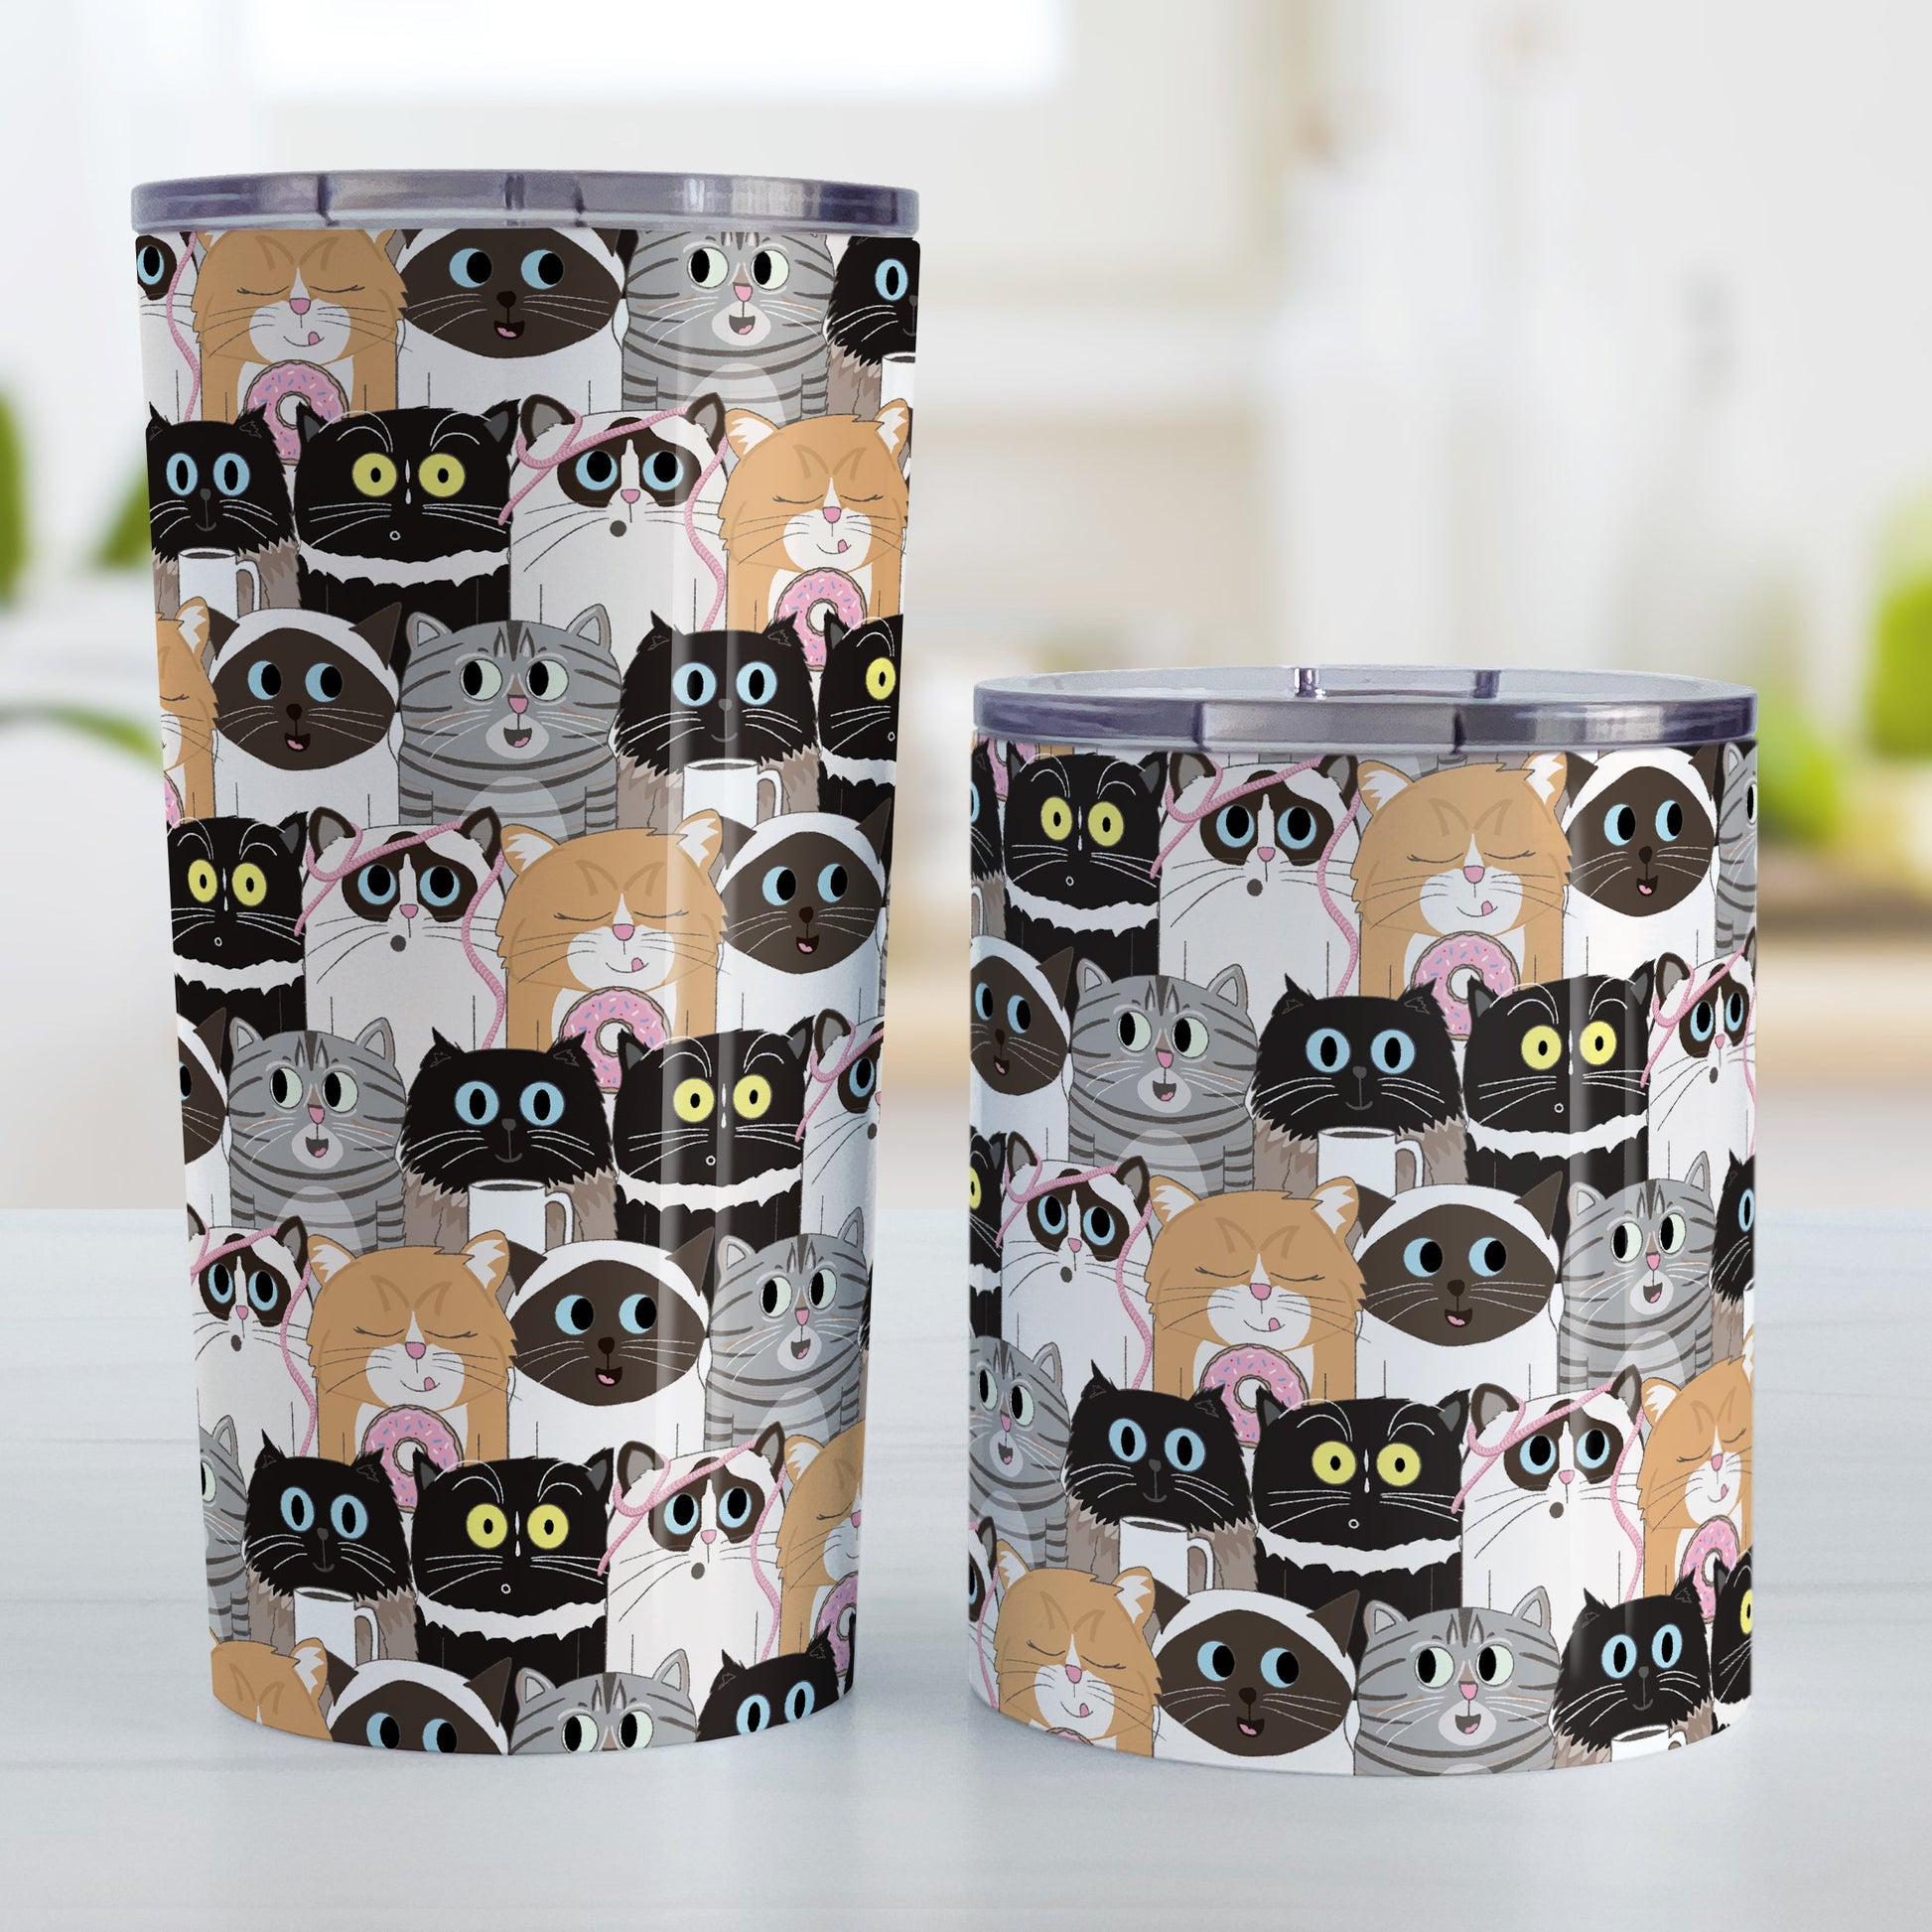 Cute Cat Stack Pattern Tumbler Cup (20oz and 10oz, stainless steel insulated) at Amy's Coffee Mugs. Cute cats tumbler cups with an illustrated pattern of different breeds of cats with different fun expressions, with yarn, coffee, and donuts. This stacked pattern of cats wraps around the cups. Picture shows both cup sizes on a counter next to each other.